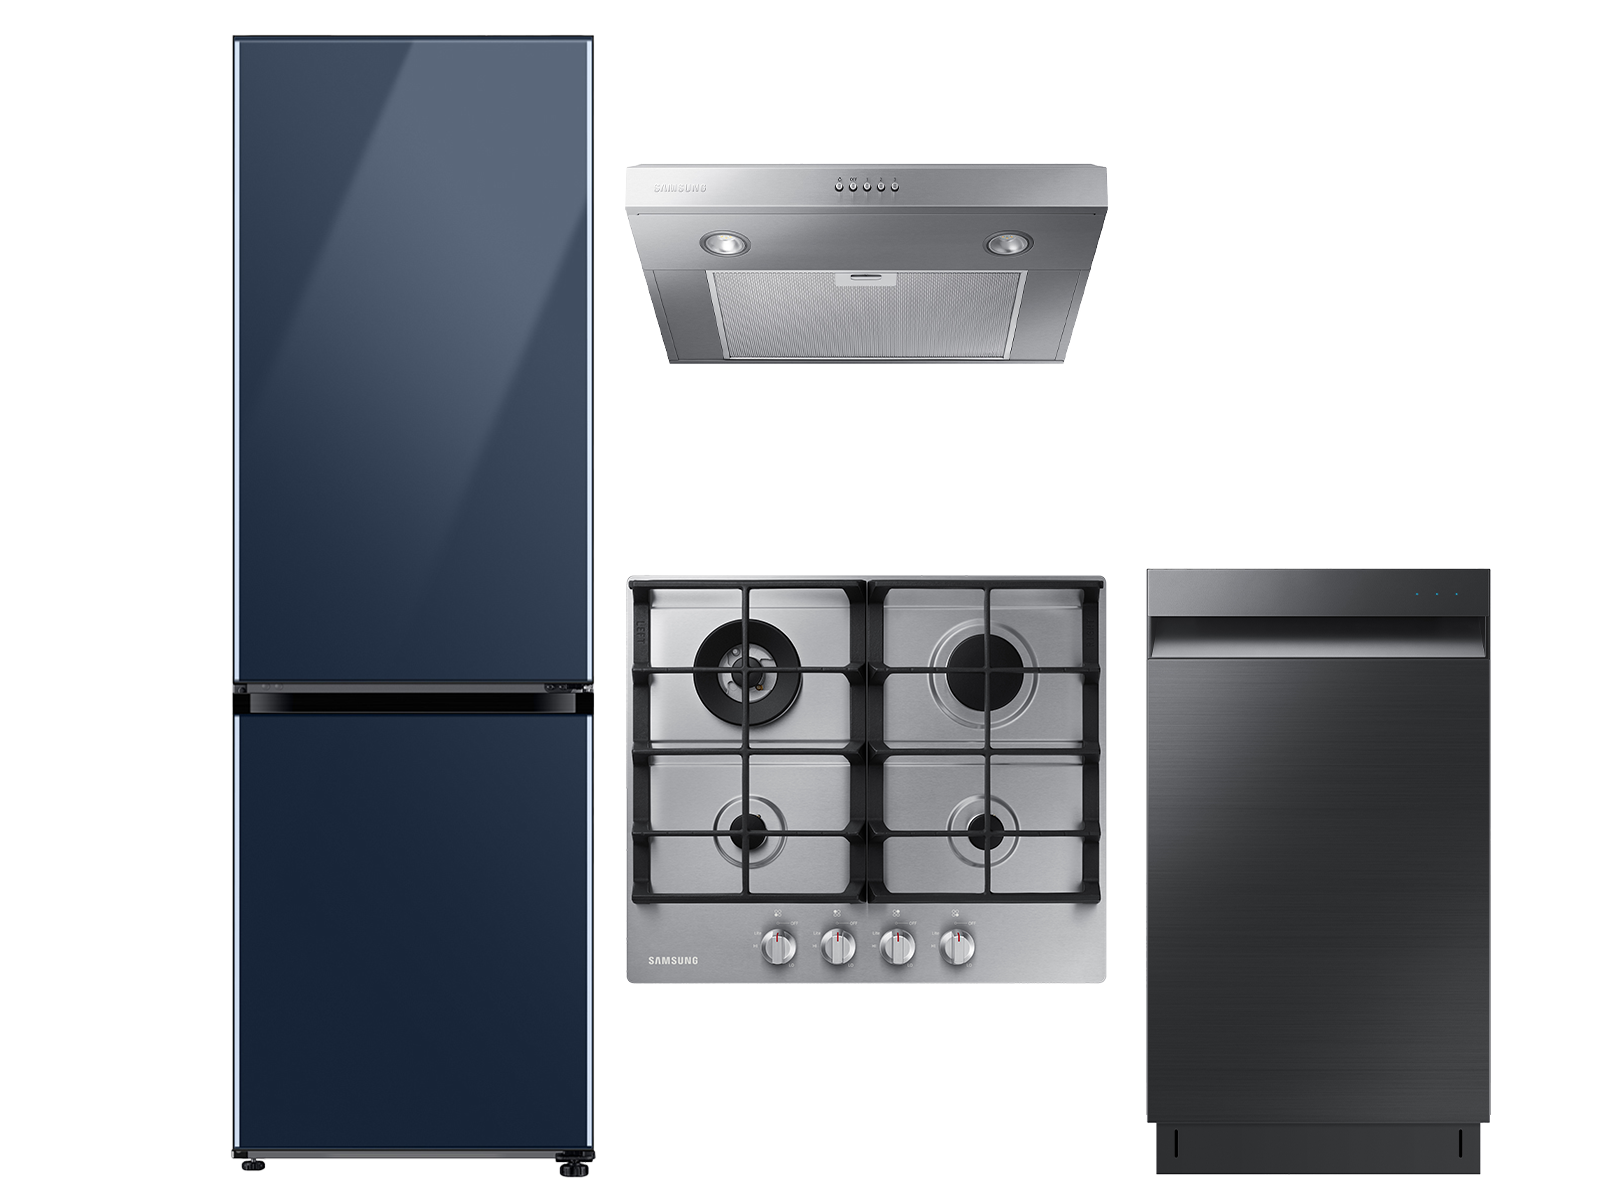 12.0 cu. ft. BESPOKE Bottom Freezer Refrigerator in Navy Glass, gas cooktop, convection microwave and Whisper Quiet dishwasher package